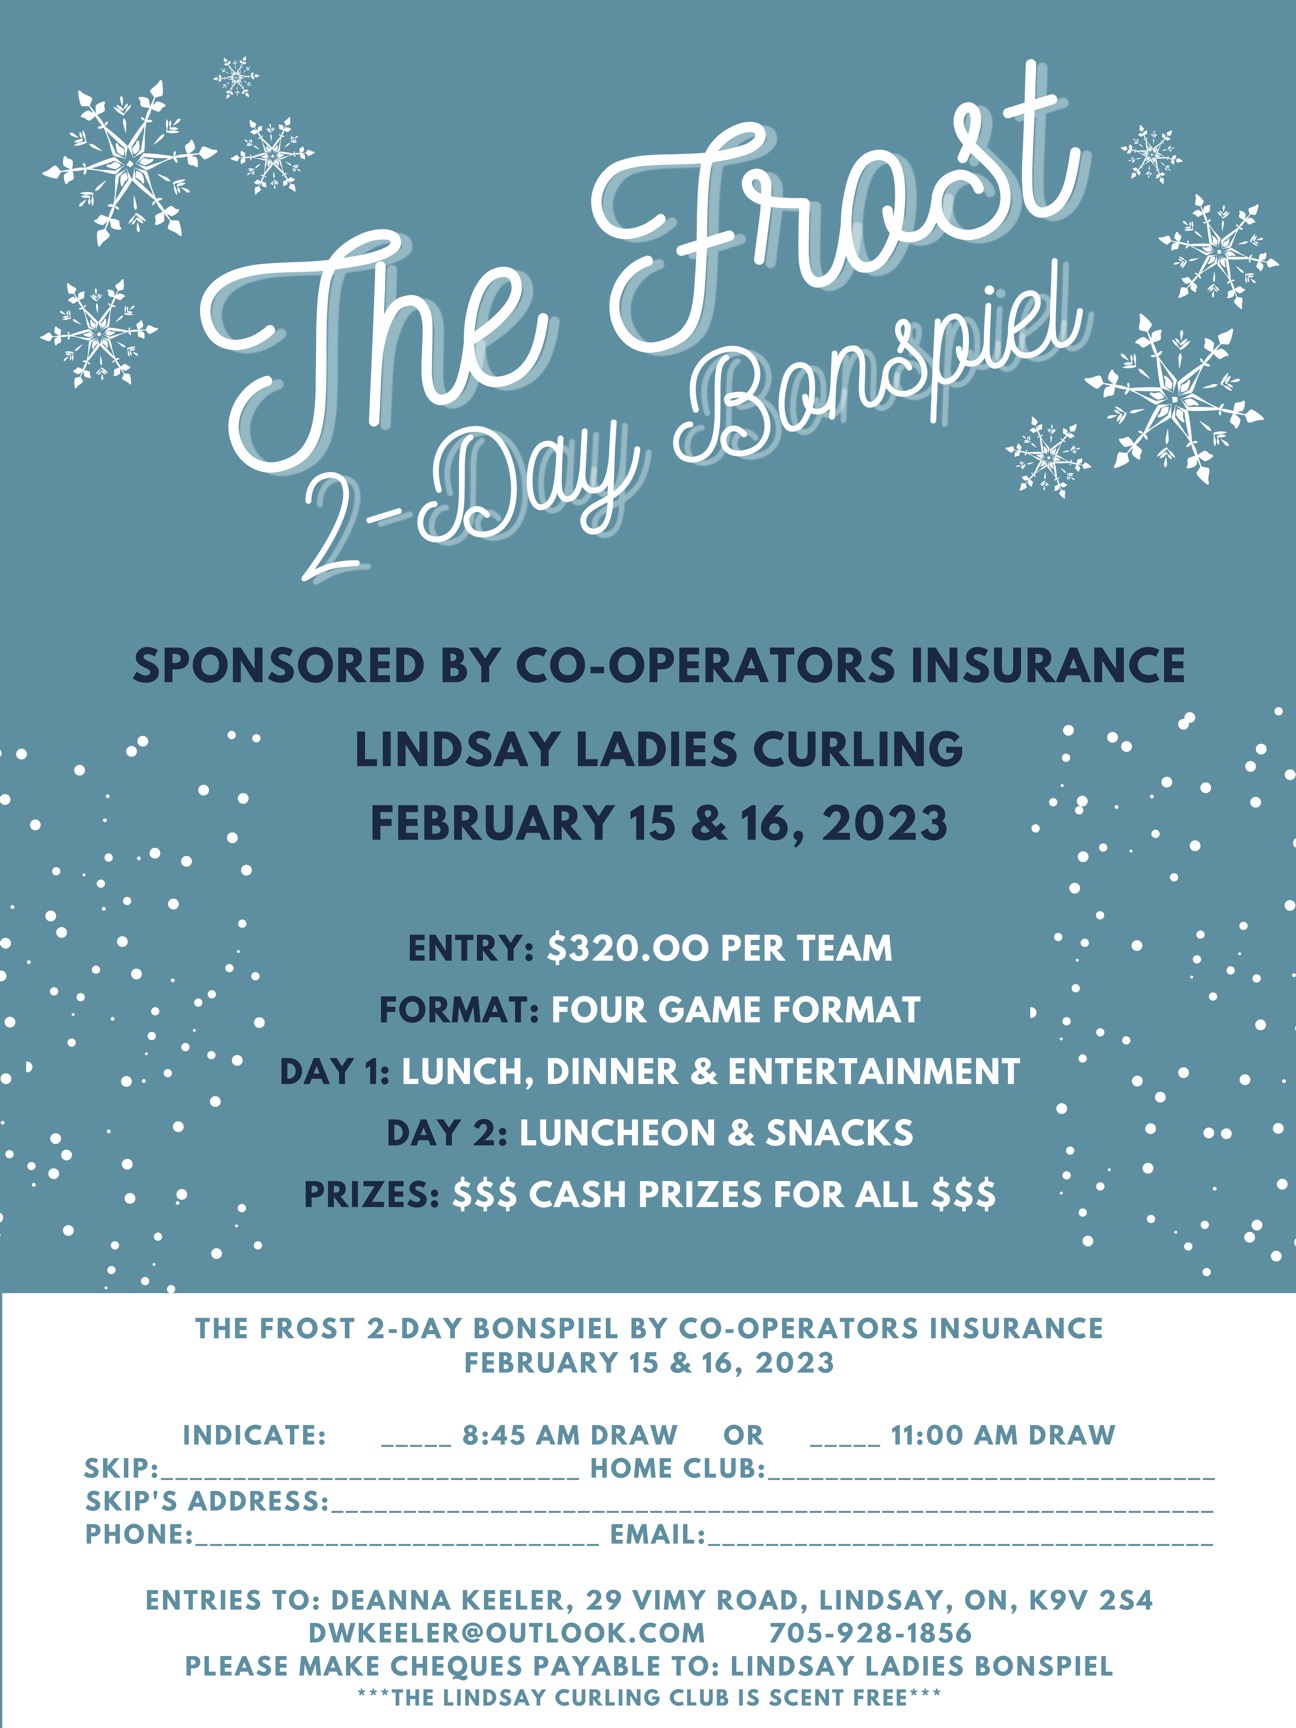 The Frost 2 day Bonspiel